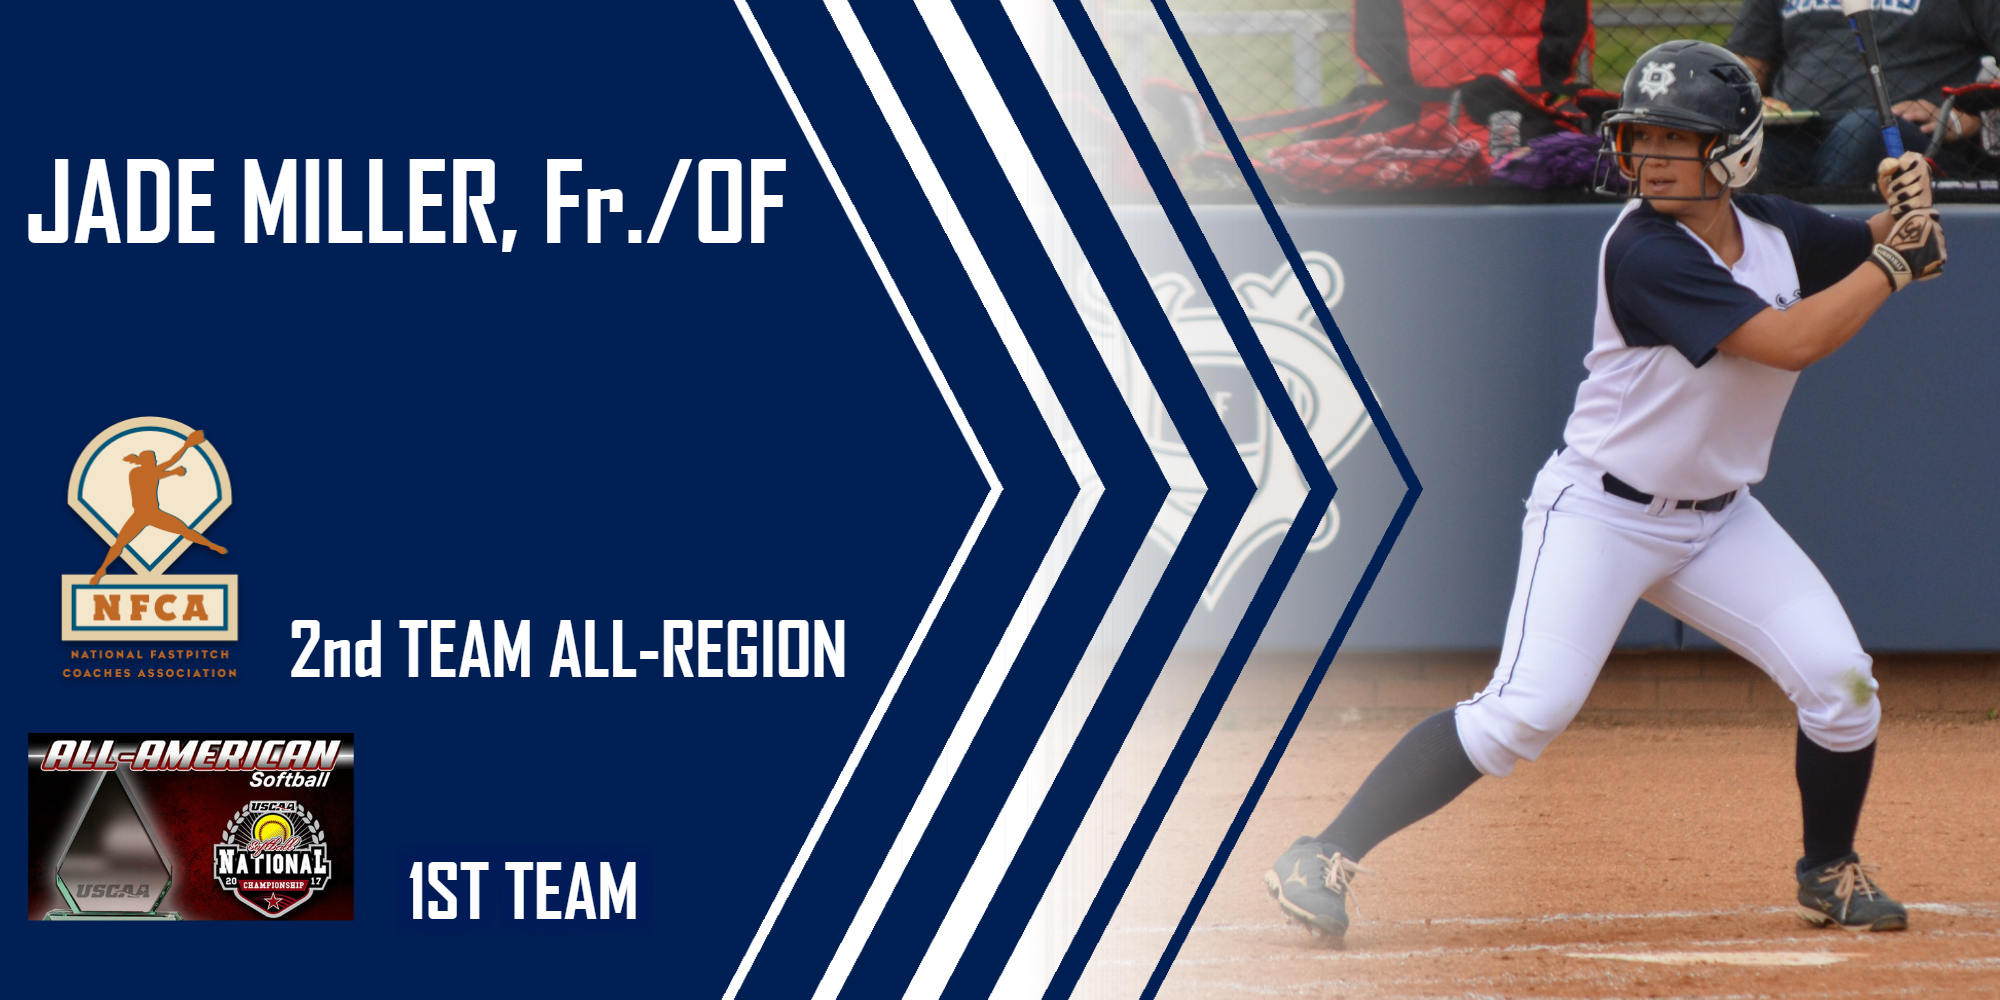 Miller adds on to her impressive postseason accolades after a strong first season with the Crusaders.